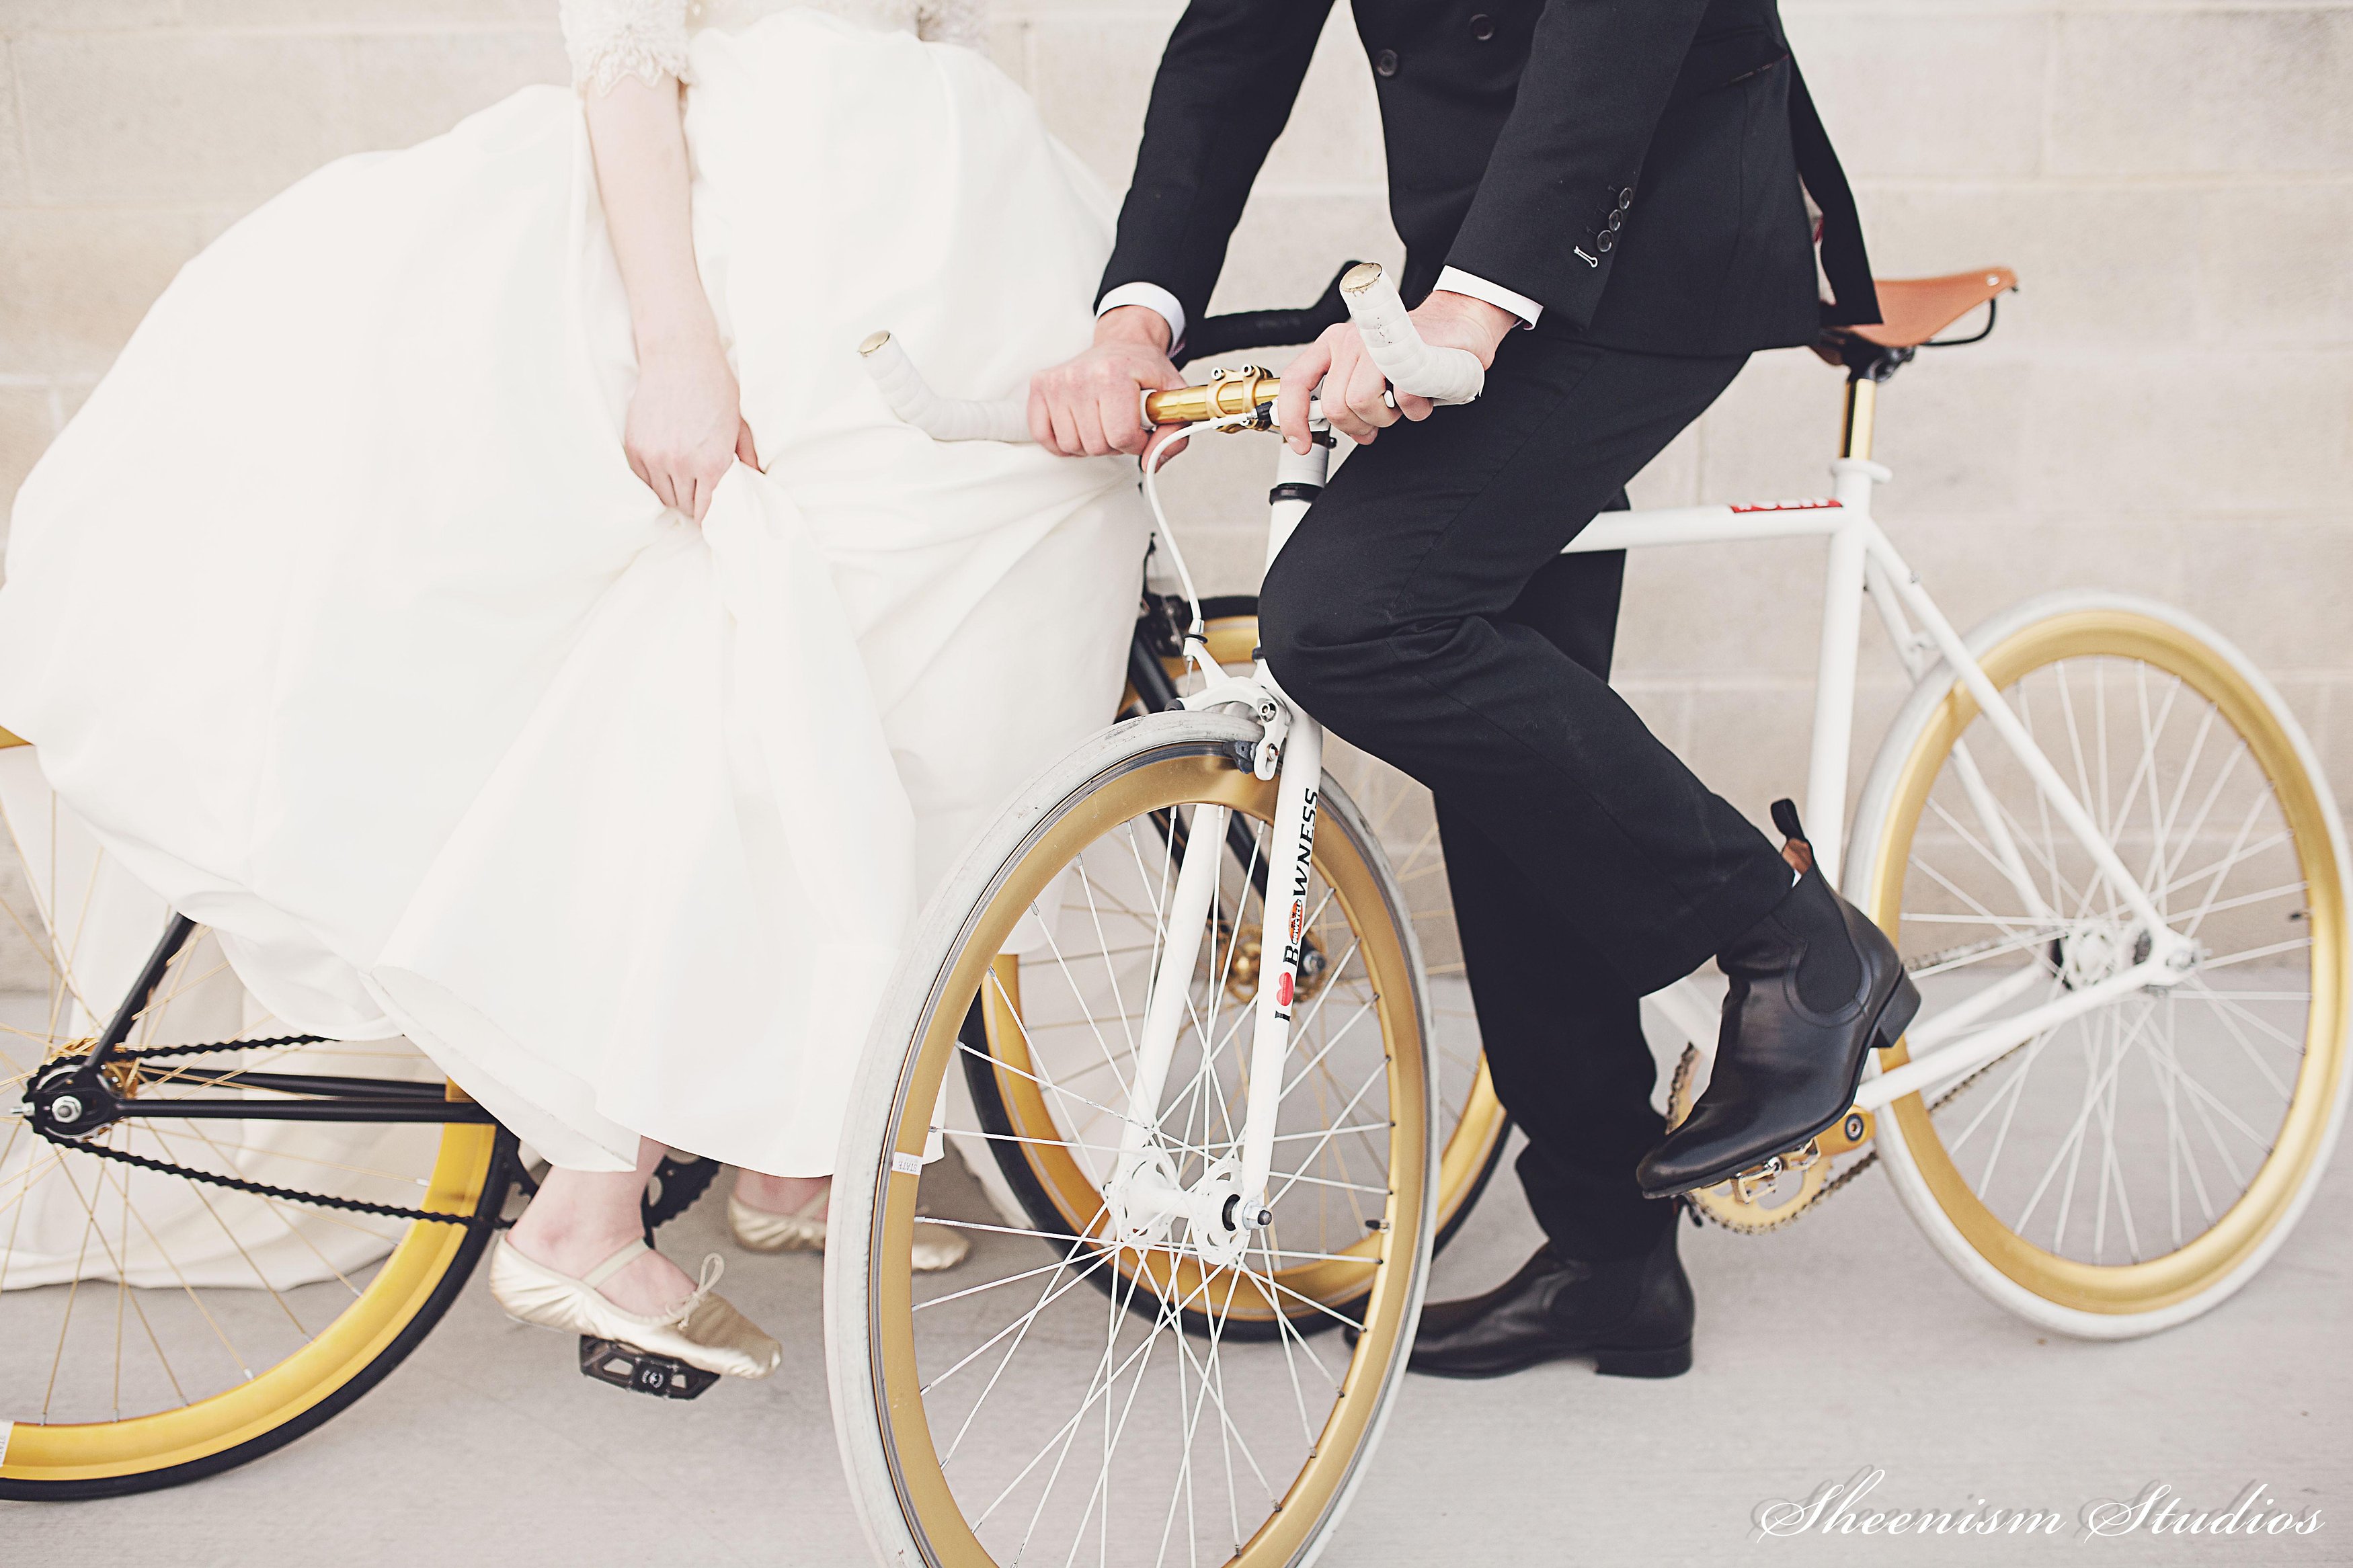 A Modern, Industrial, Canadian Wedding | Photography by Sheenism Studios